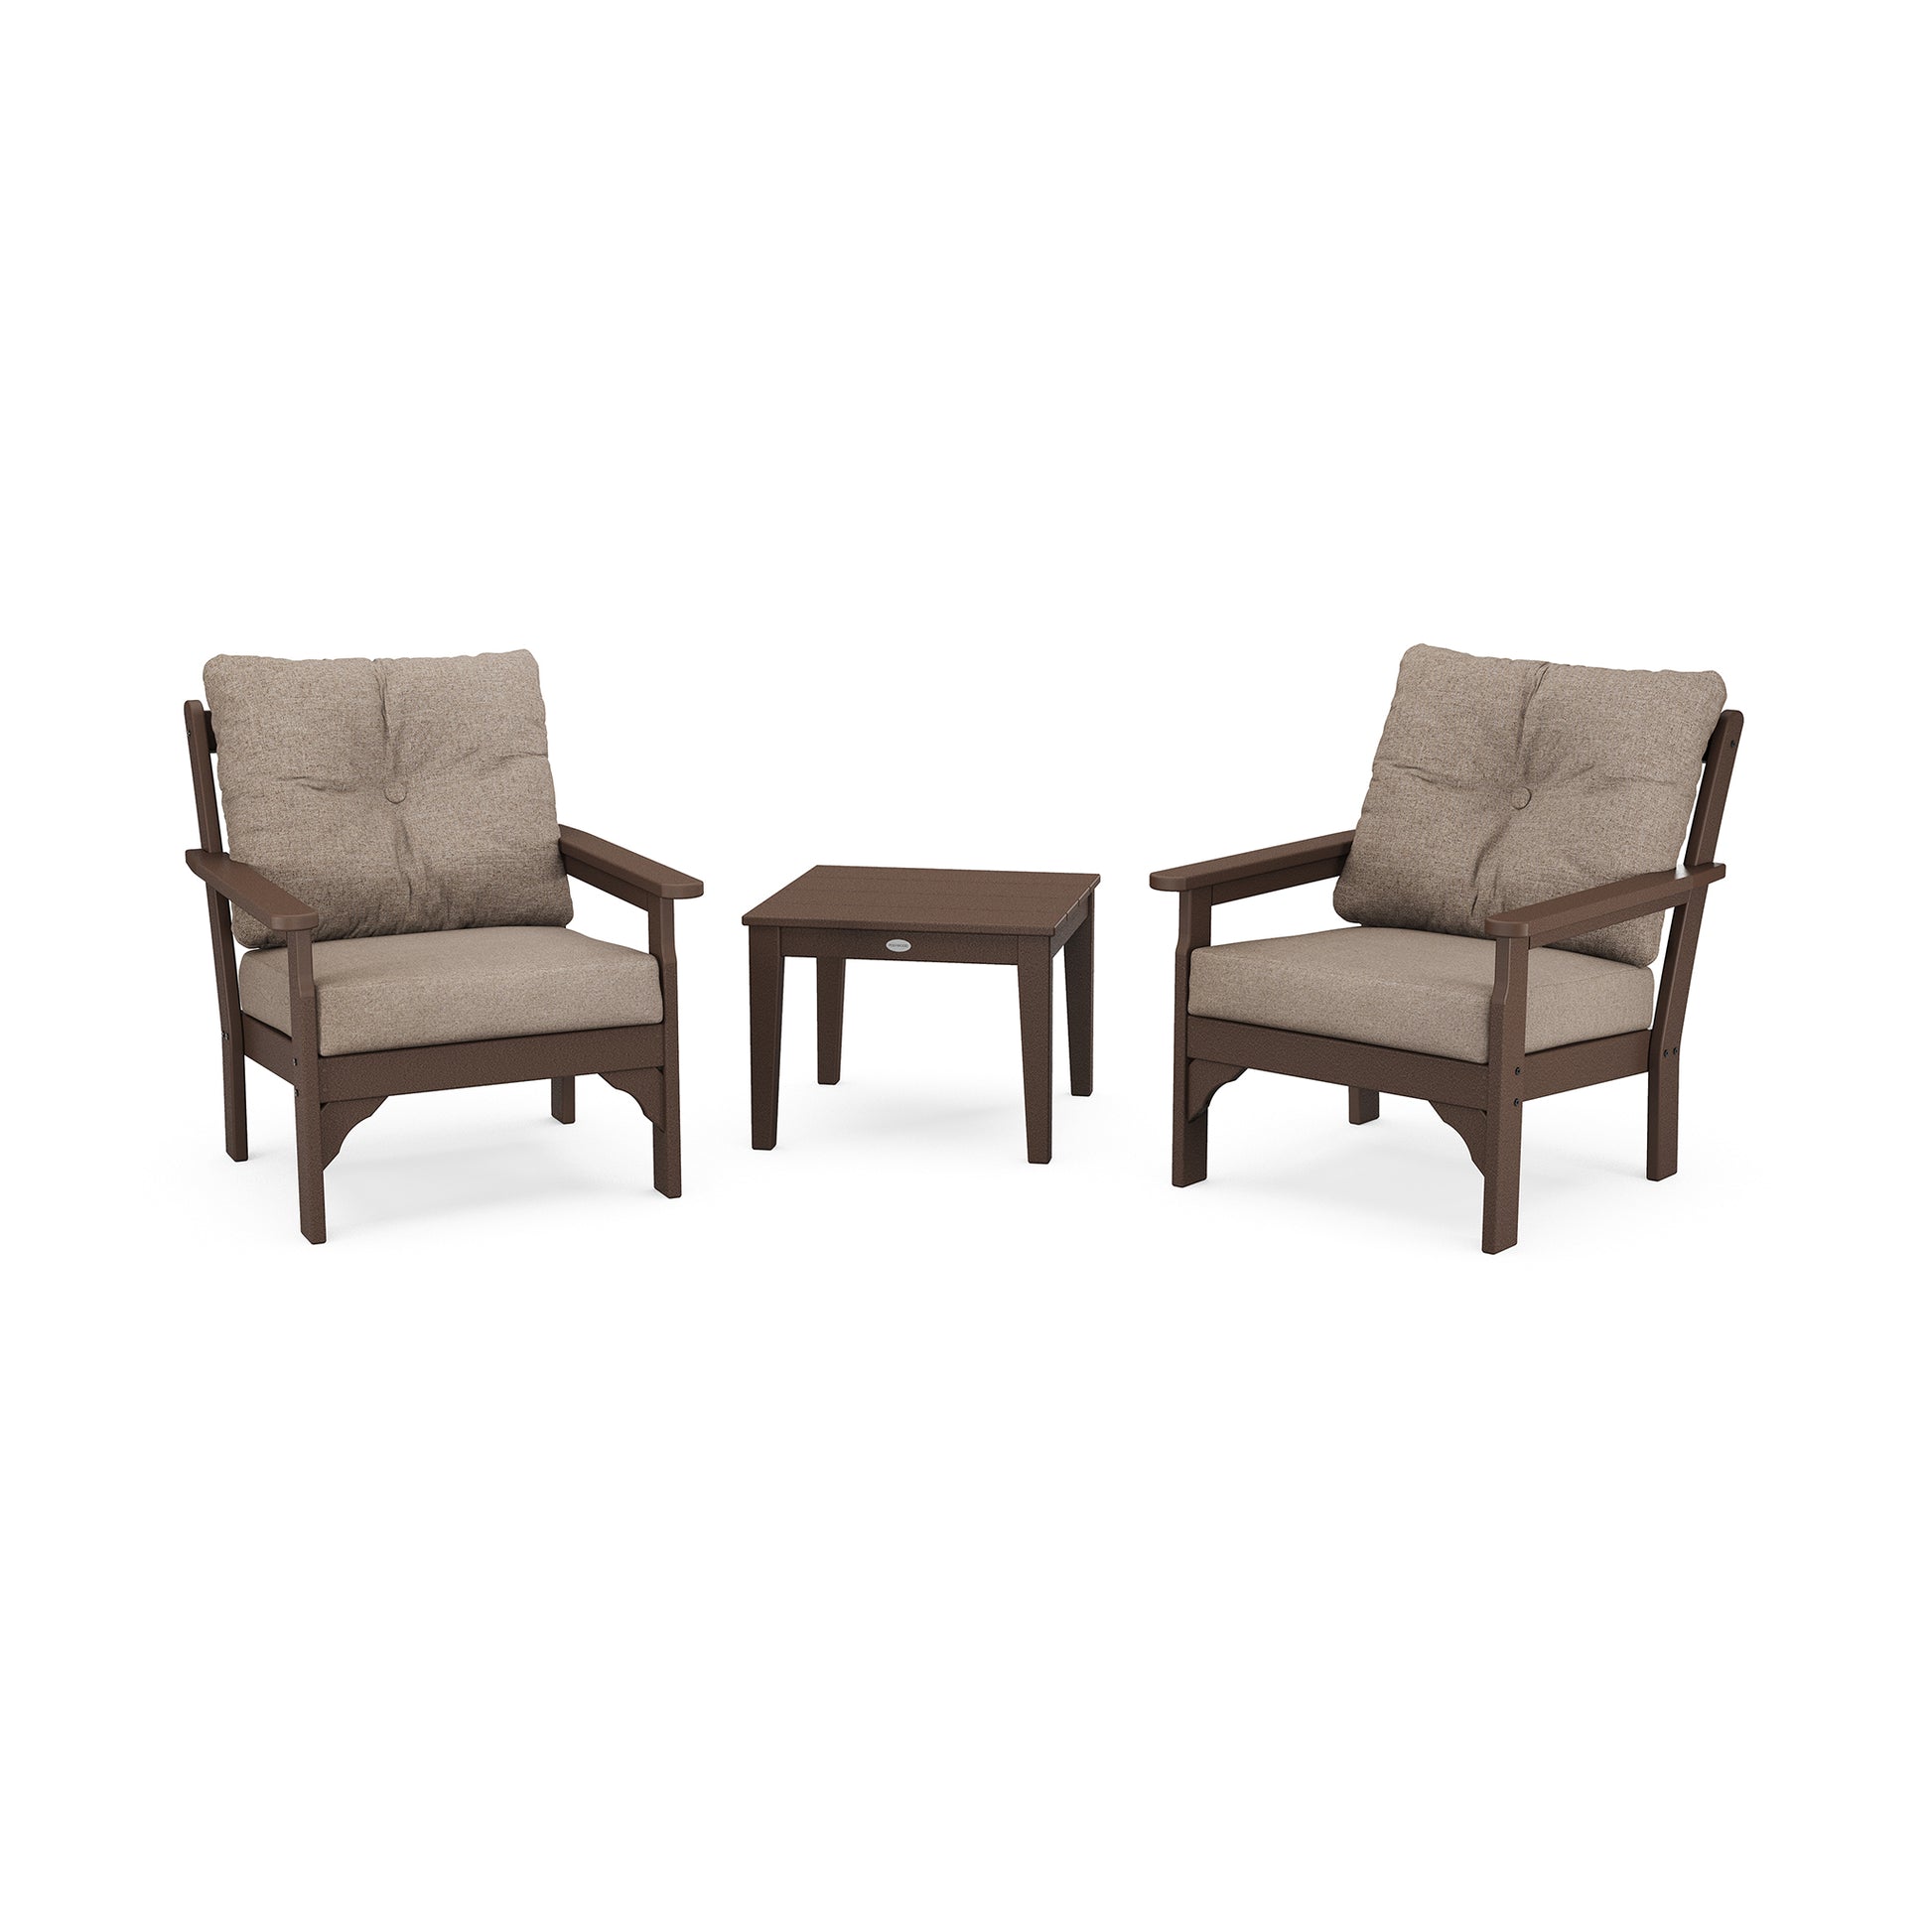 Two brown POLYWOOD Vineyard outdoor armchairs with beige deep seating cushions paired with a small matching brown side table, displayed on a white background.